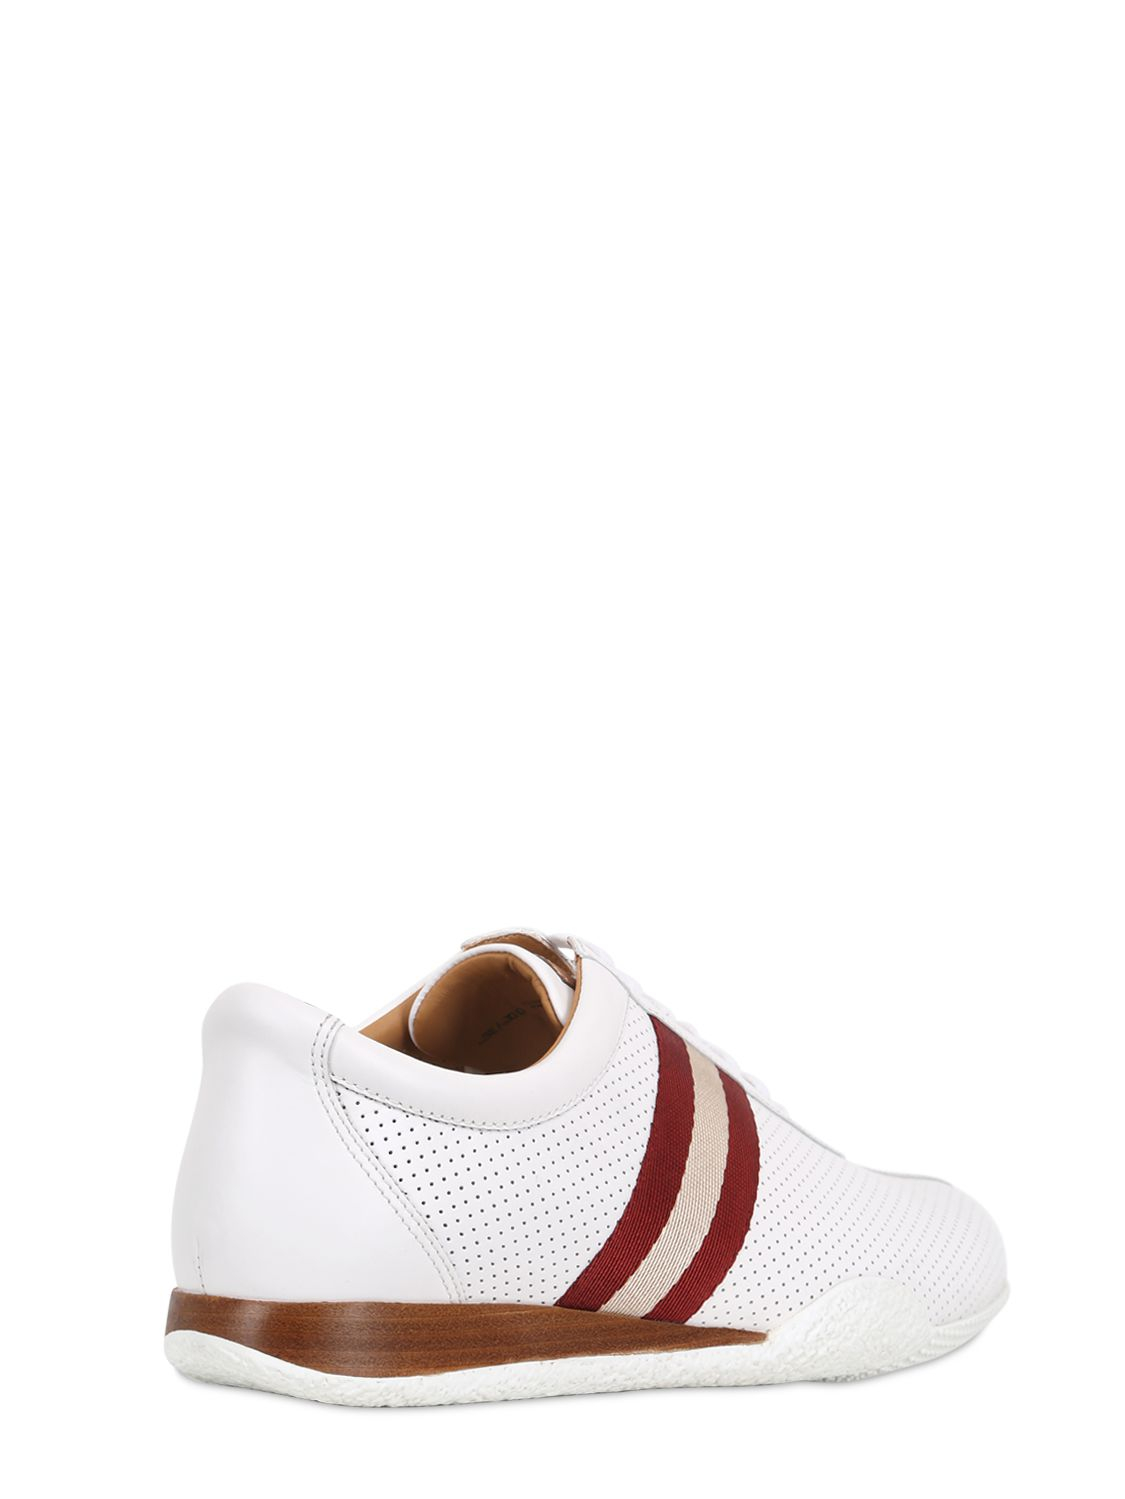 Bally Frenz Perforated Leather Sneakers in White for Men | Lyst